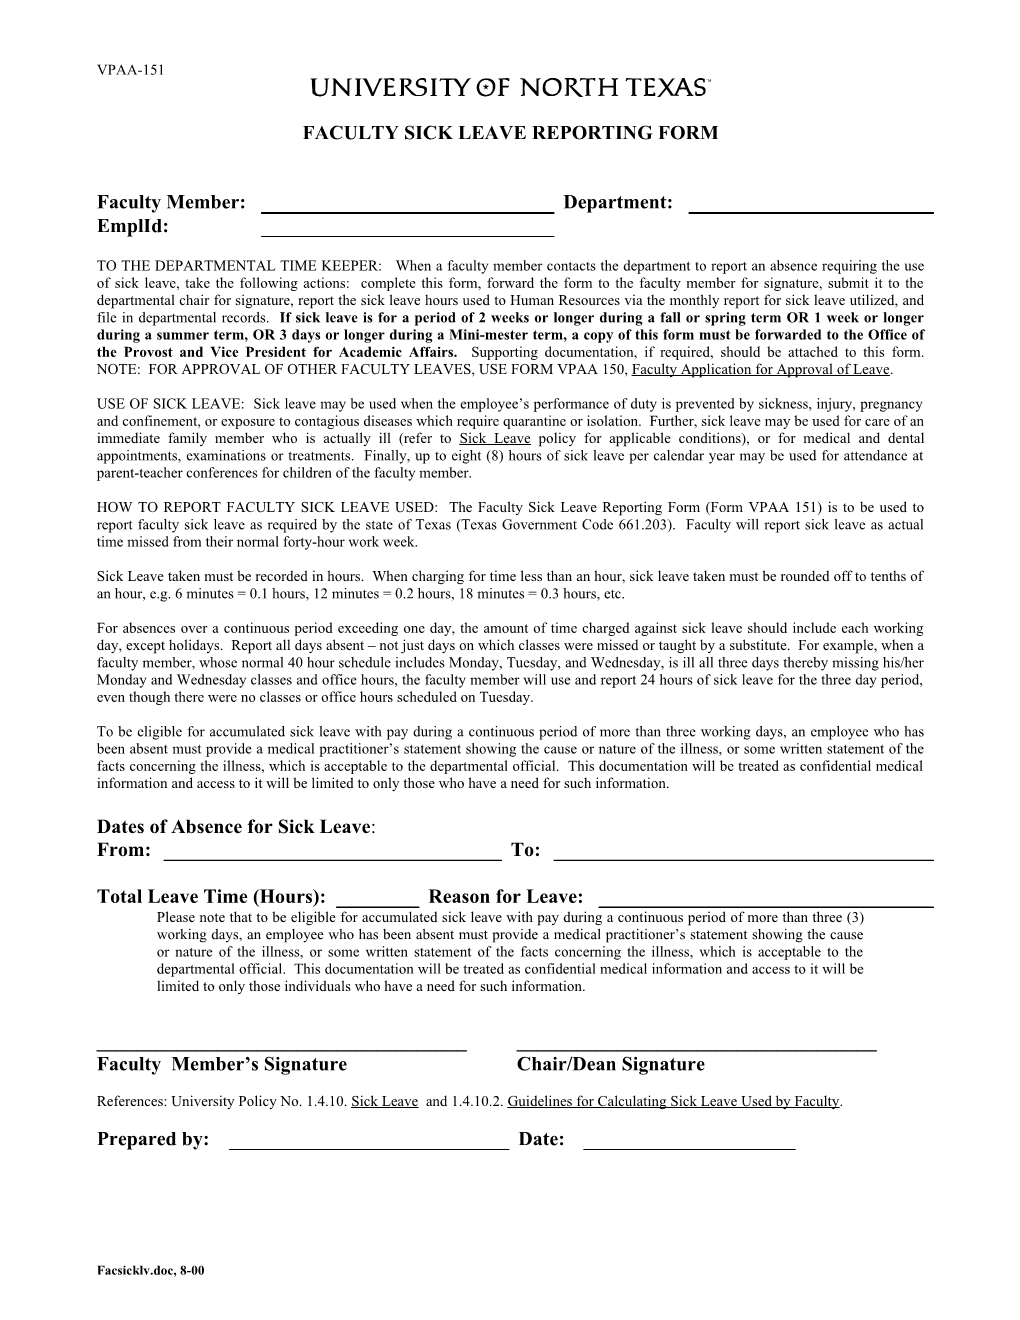 FACULTY SICK LEAVE REPORTING FORM (Form VPAA 151)